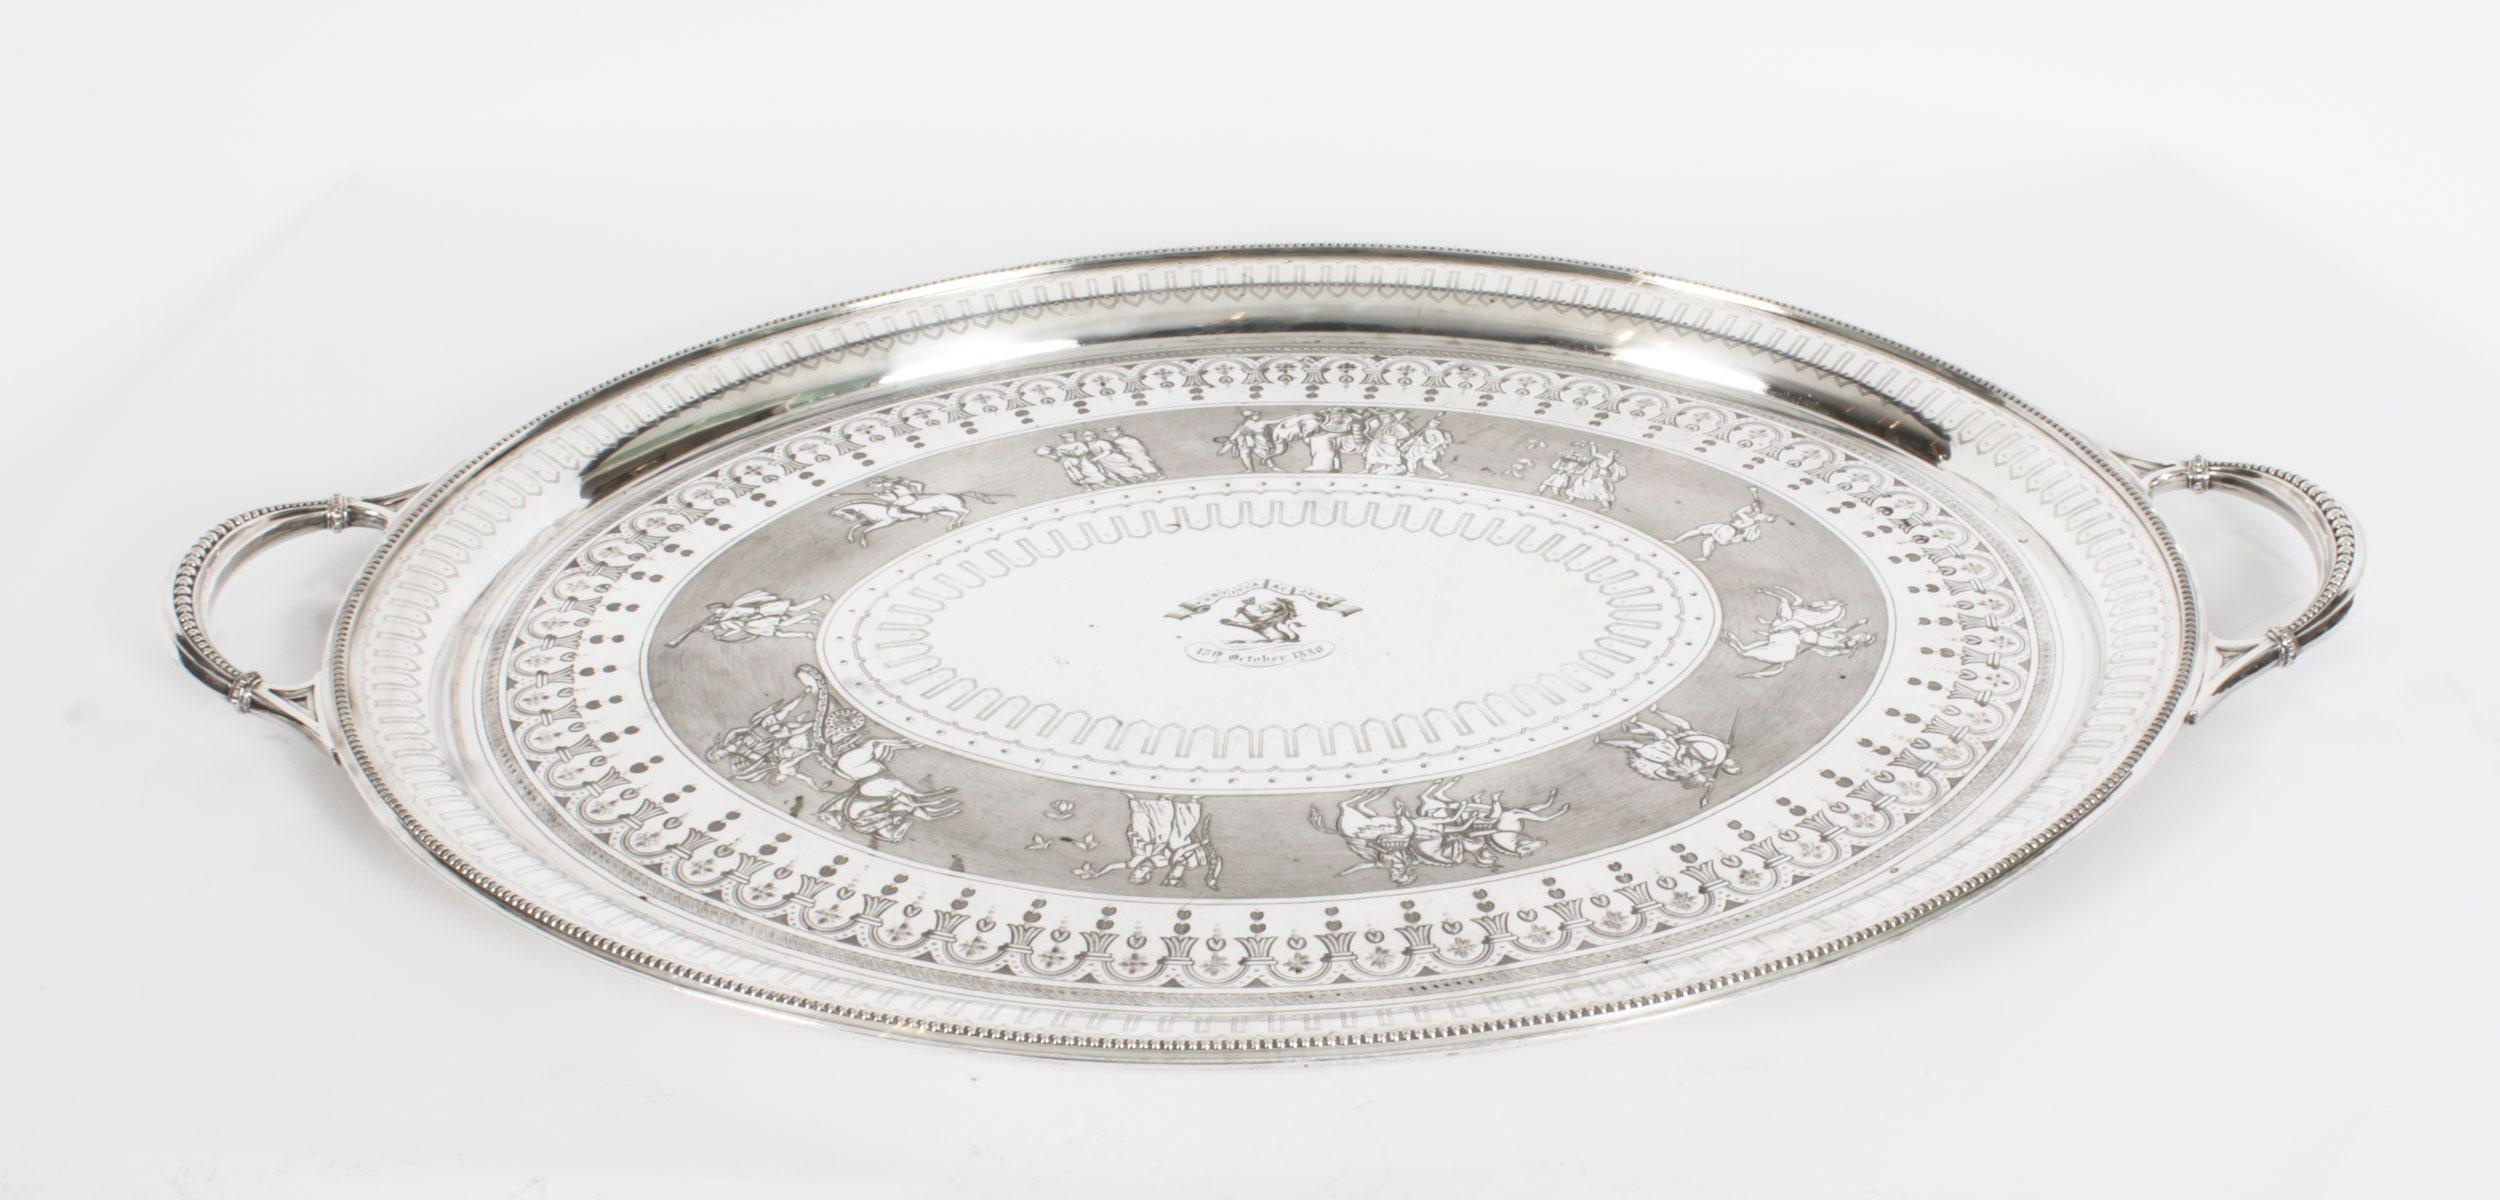 This is a momumental beautiful antique English Victorian neo-classical oval silver-plated twin handled tray by the renowned silversmith Walker & Hall, circa 1880 in date.
 
This large oval silver plated tray has elegant engraved stylised c-scrolls